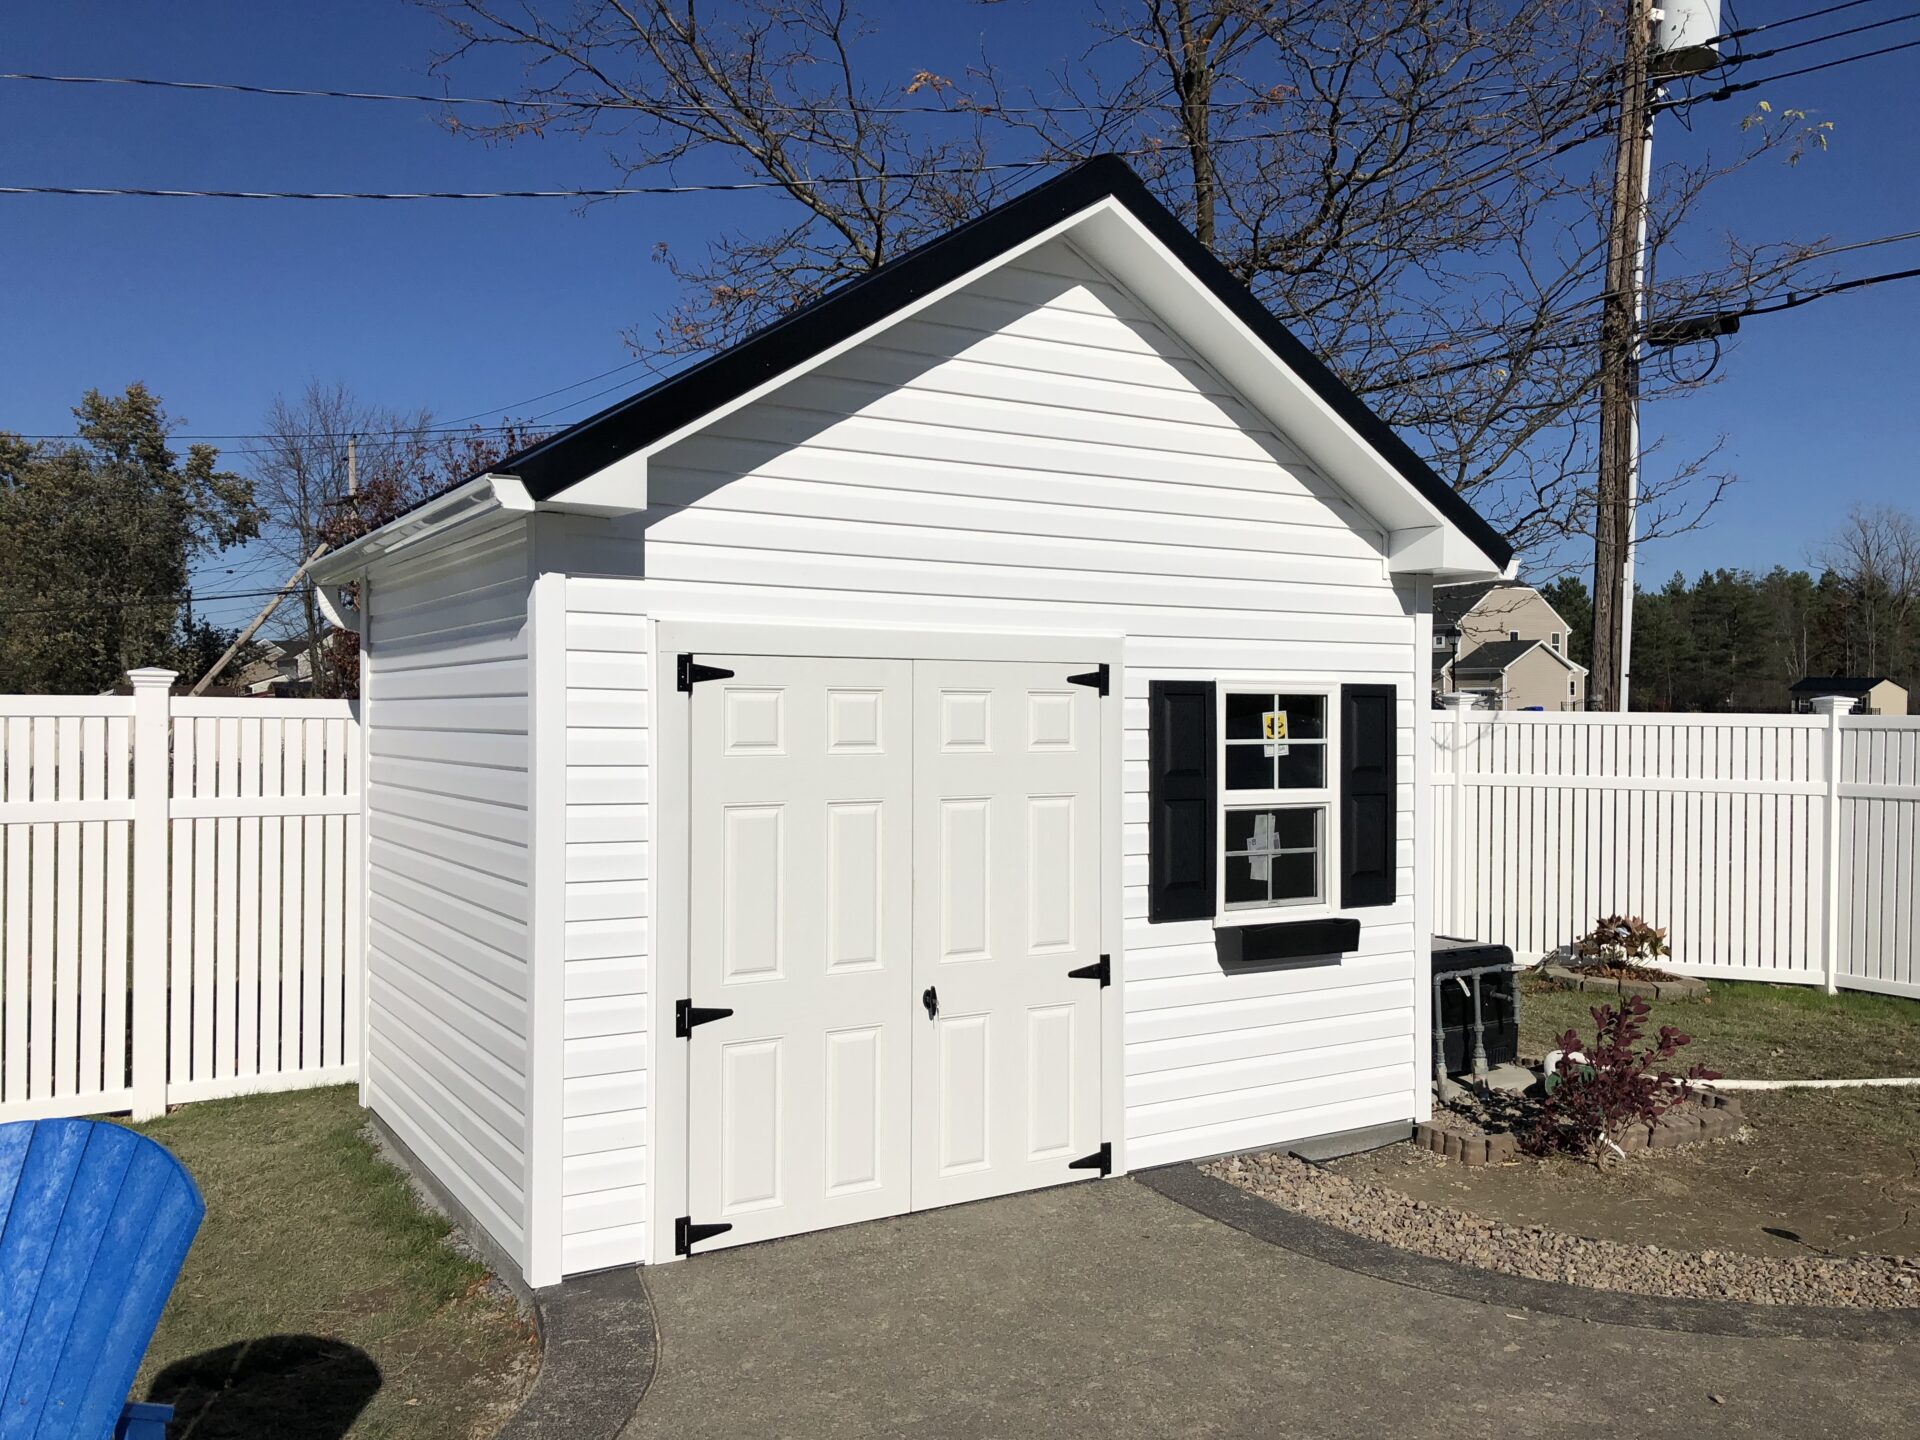 A white shed with two black shutters and a black door.